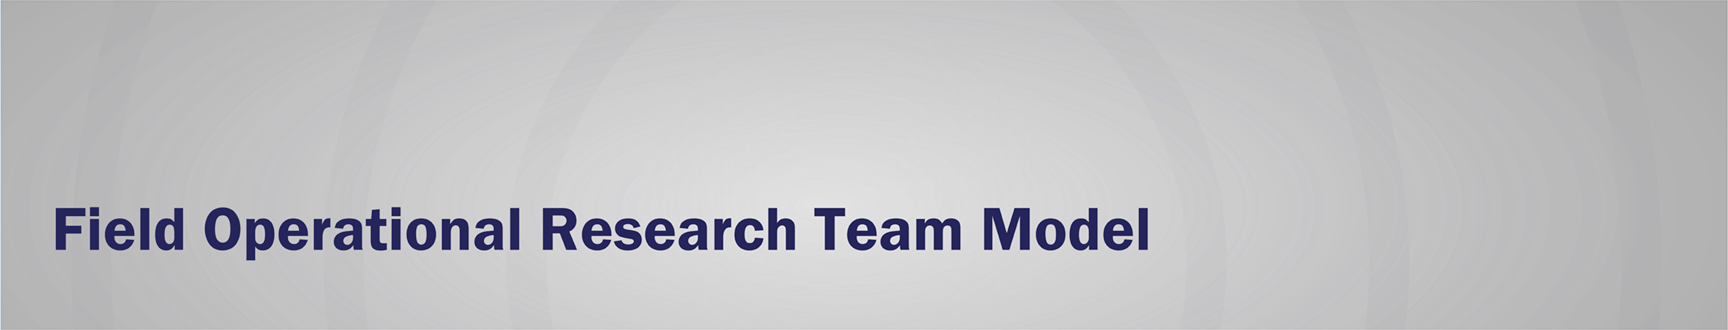 Field Operational Research Team banner